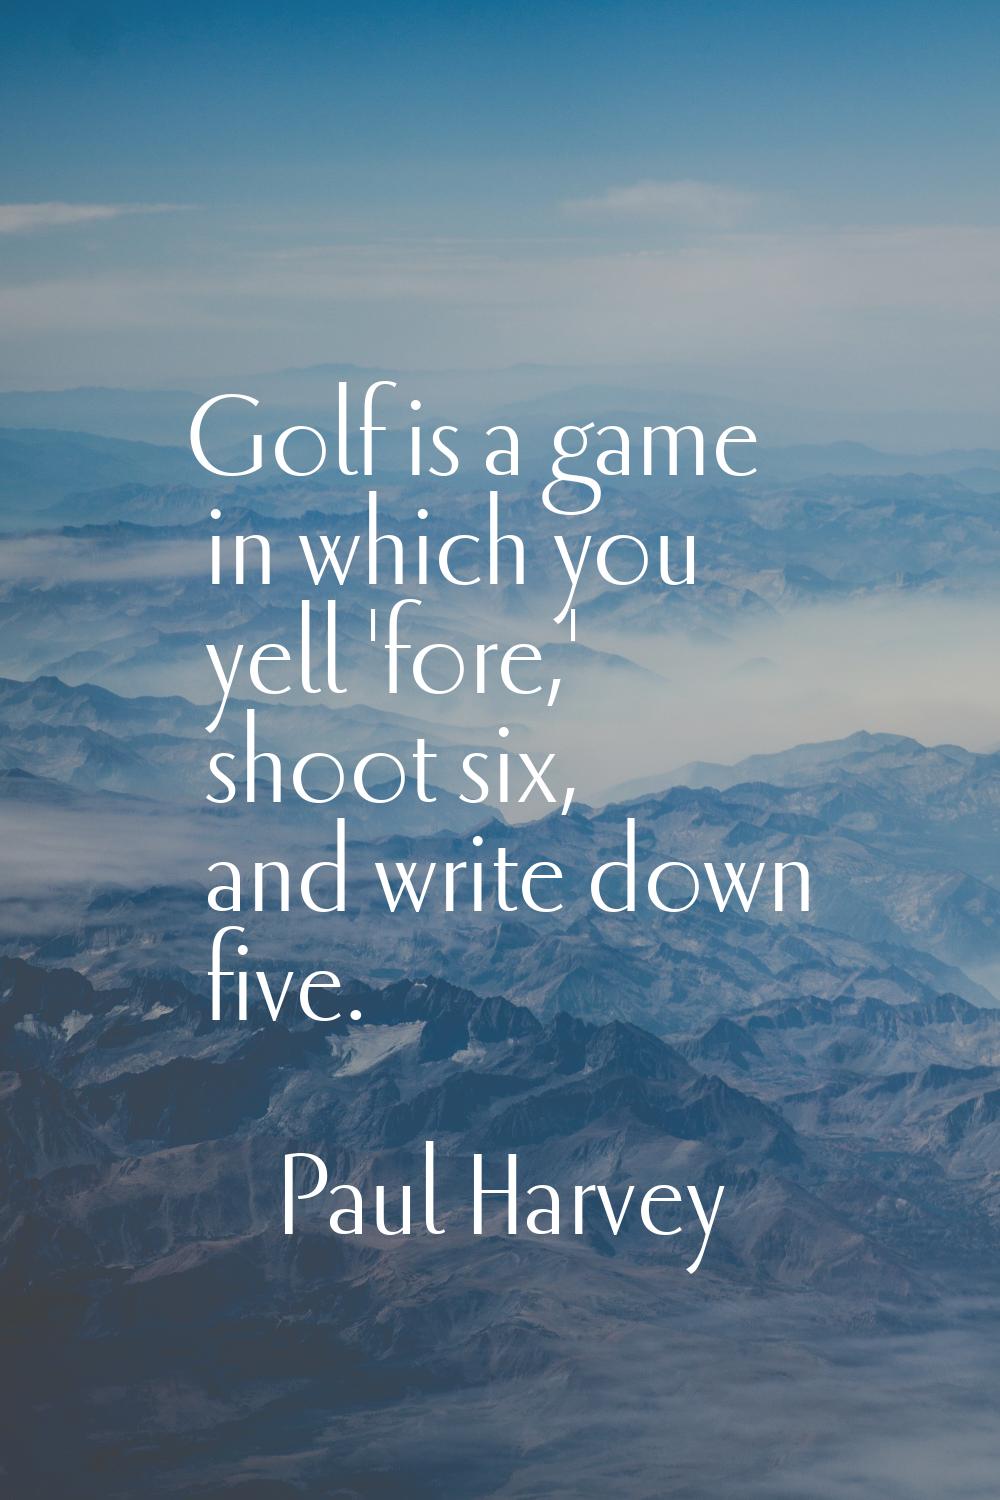 Golf is a game in which you yell 'fore,' shoot six, and write down five.